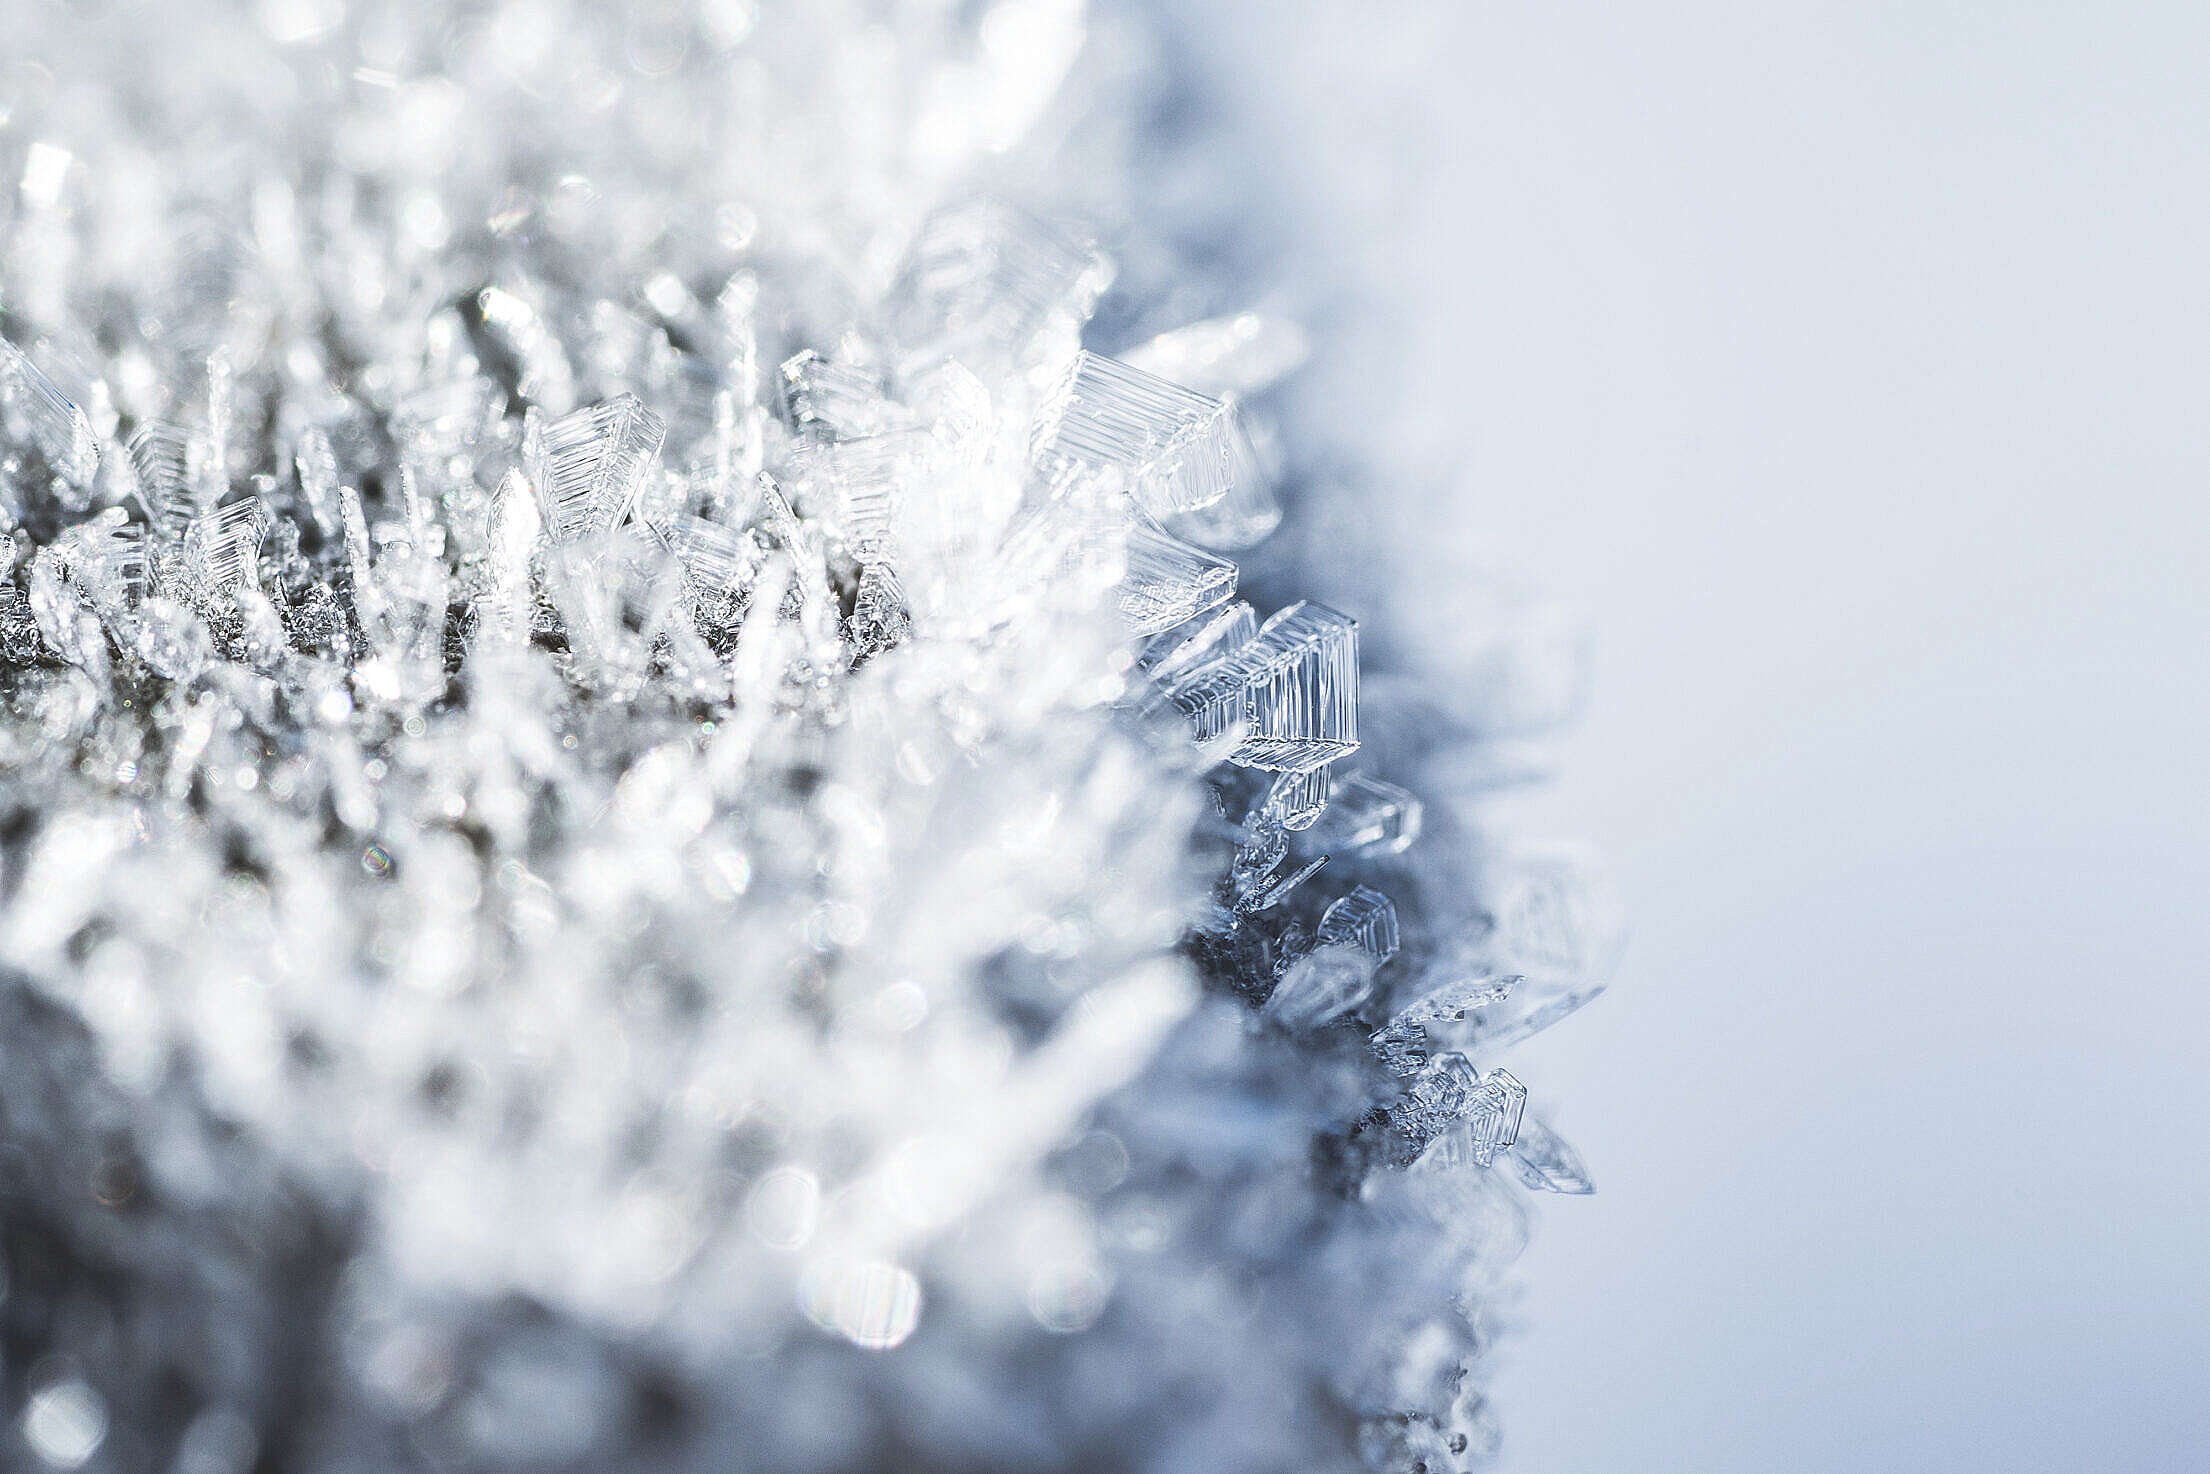 Morning Hoar Frost Frozen Snowflakes Close Up Free Stock Photo